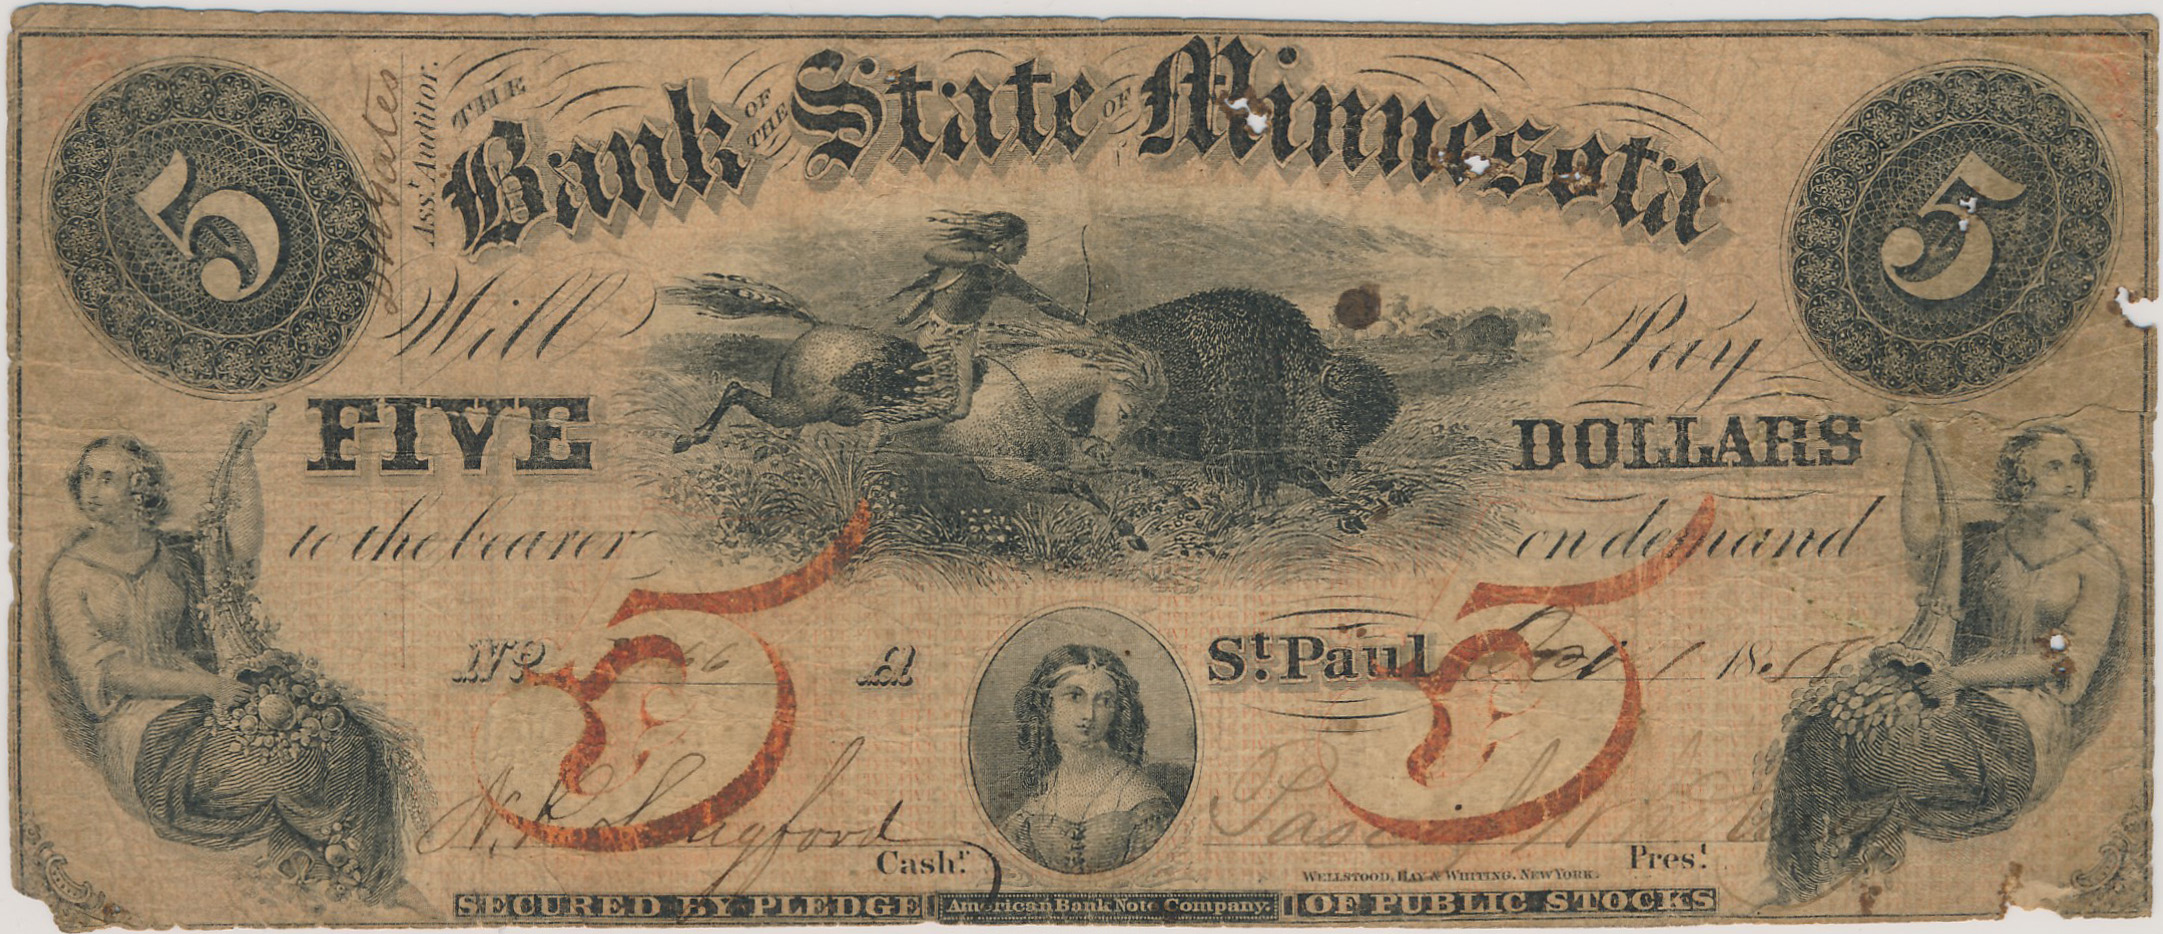 $5 Bank of the State of Minnesota